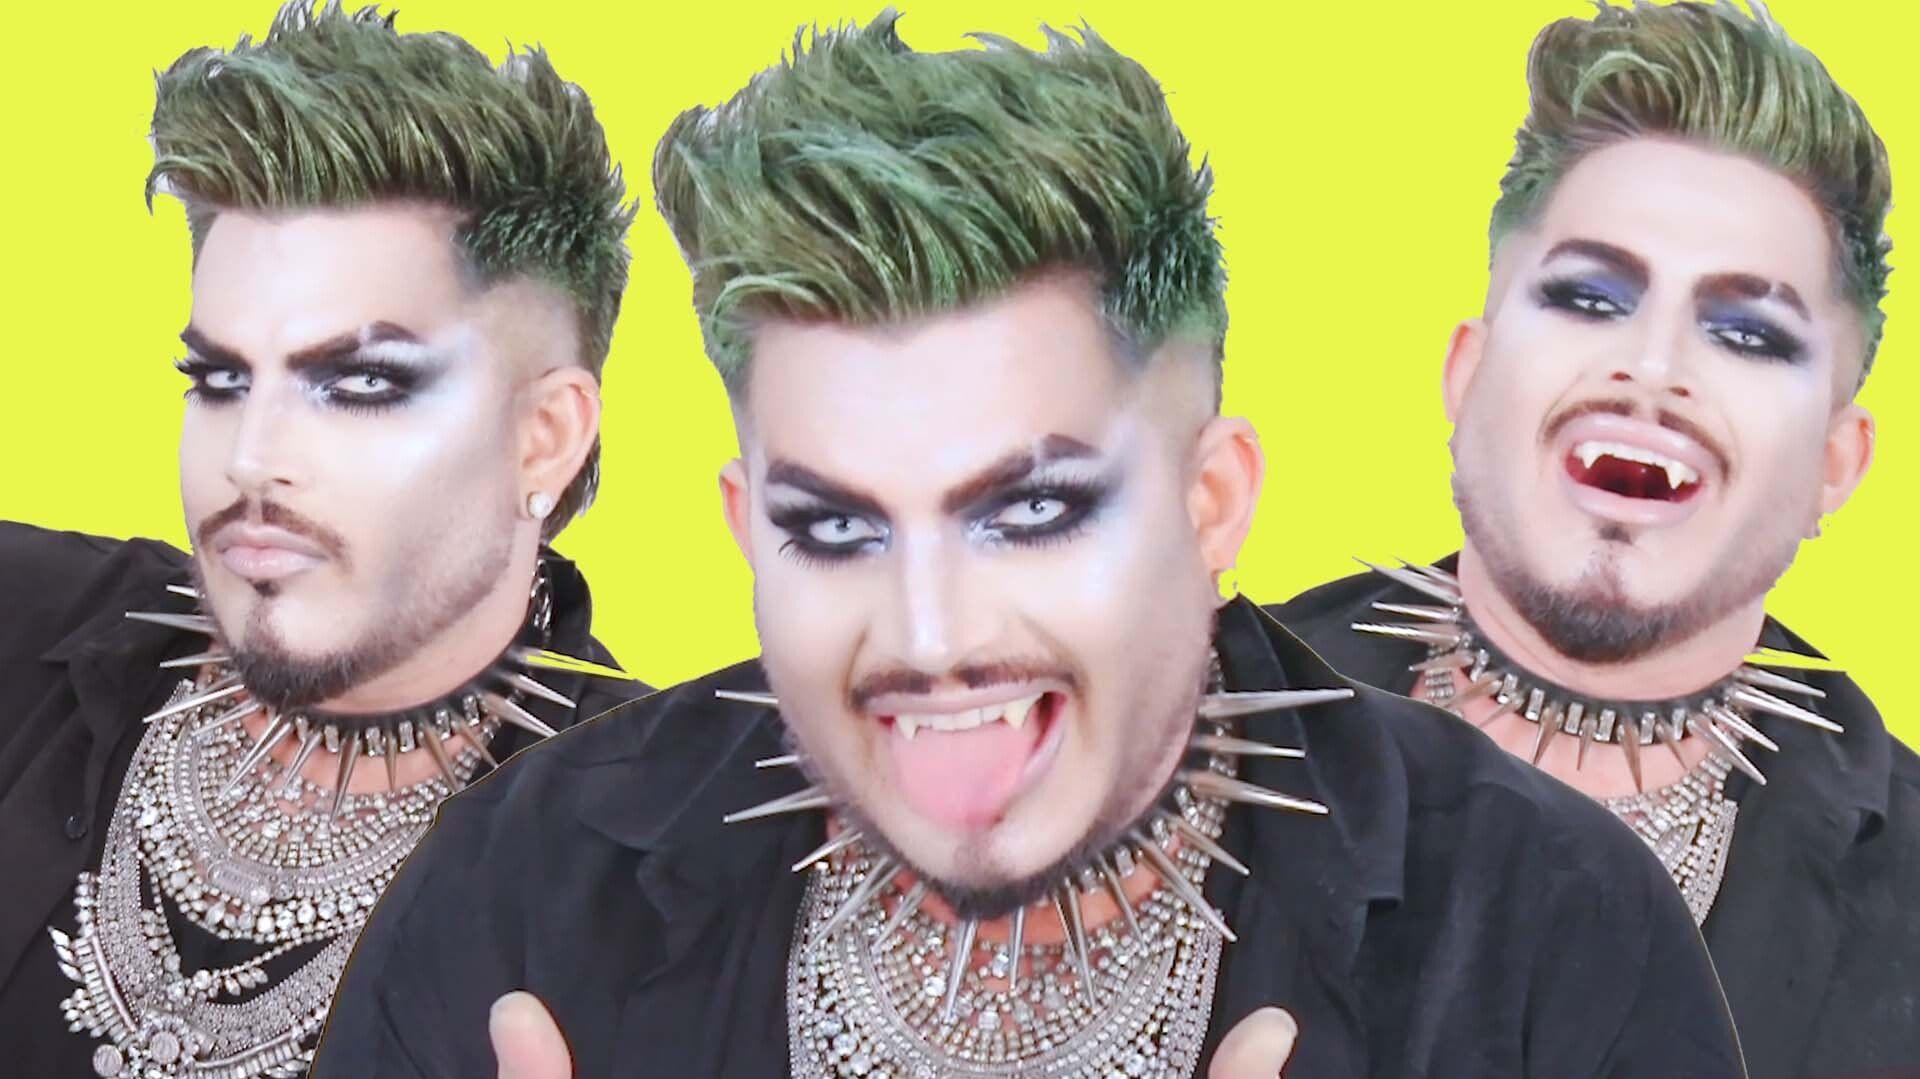 Check Out Adam Lamberts Easy Glam pire Halloween Makeup